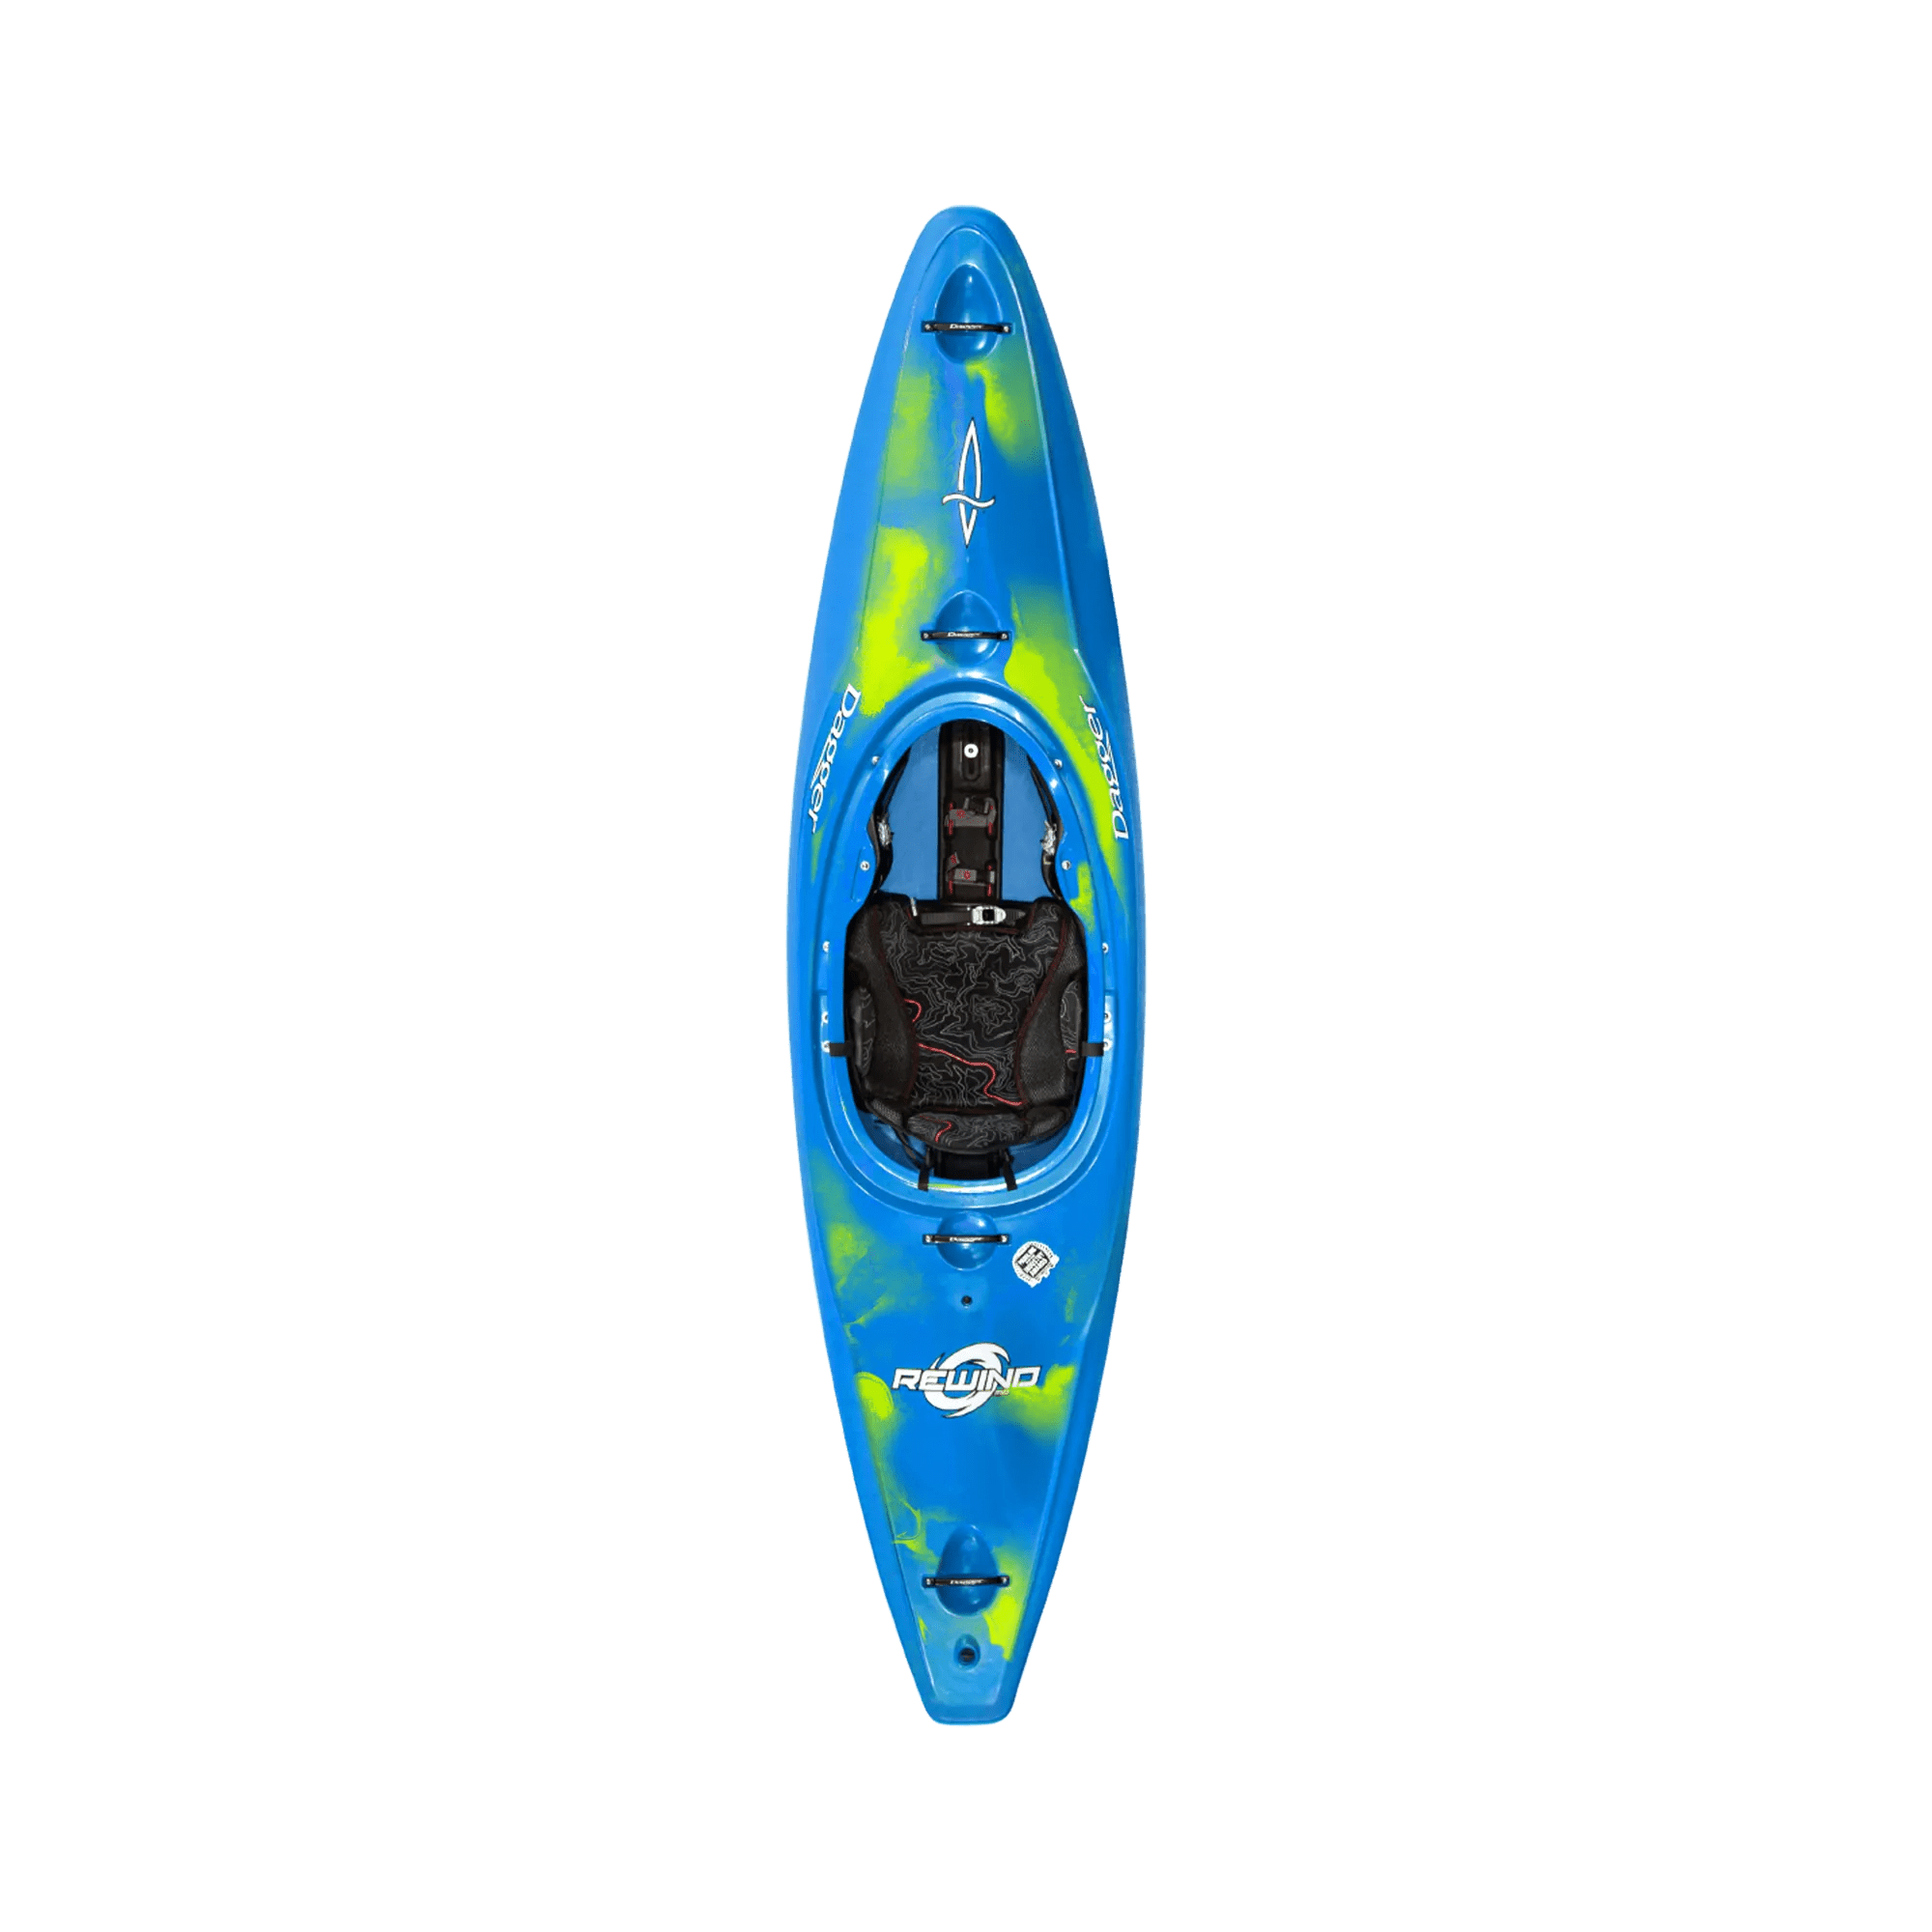 DAGGER - Rewind MD River Play Whitewater Kayak - Blue - 9010340197 - TOP 